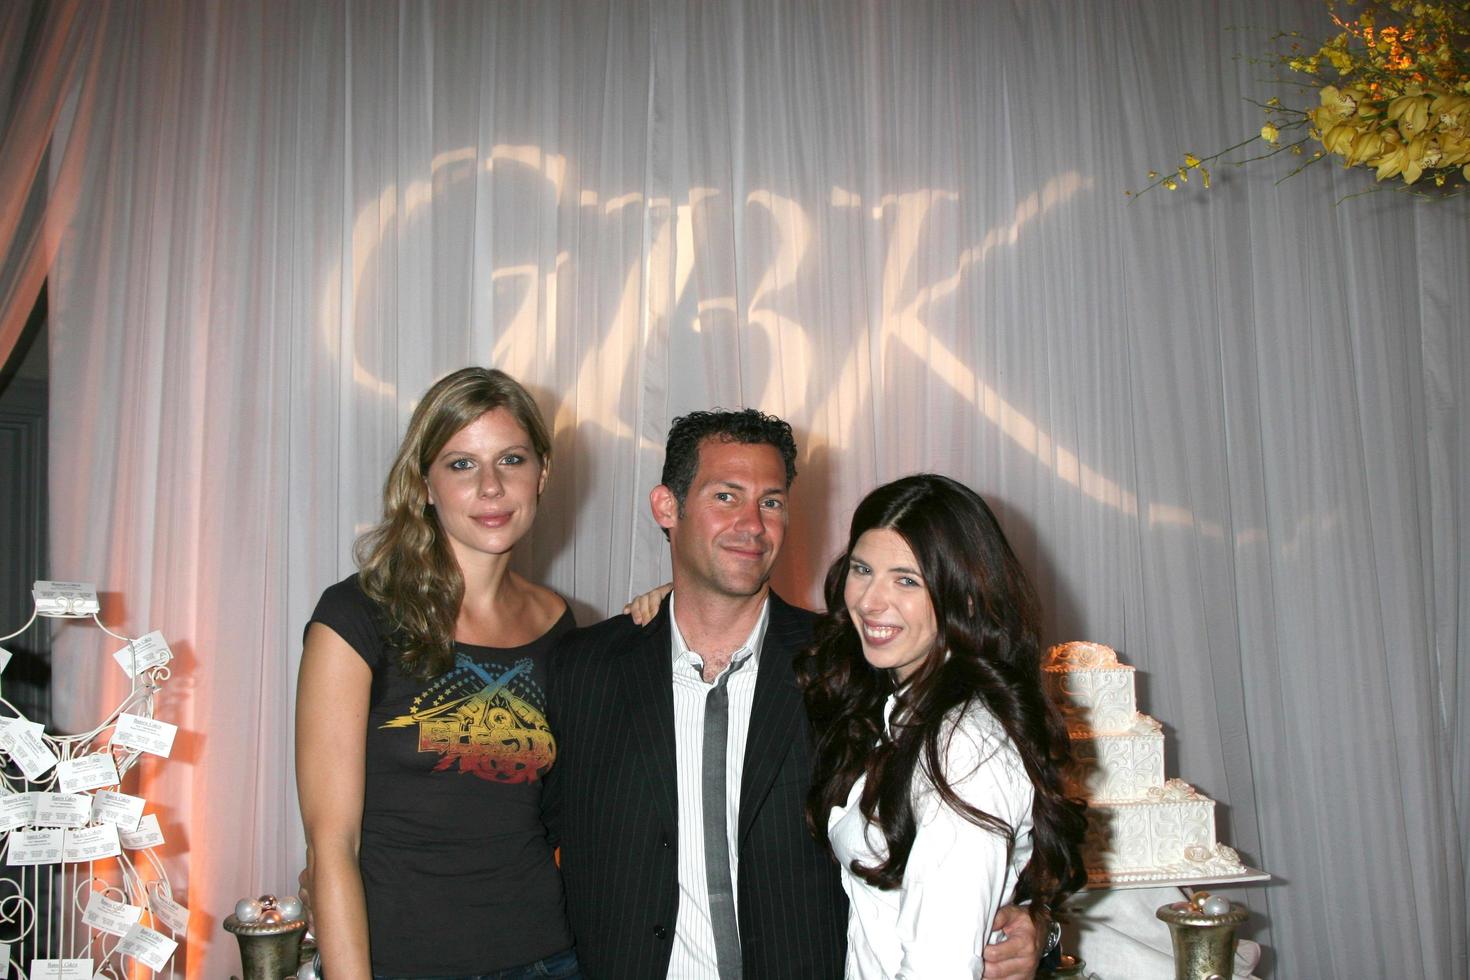 Carolyn Murphy Gavin B Keilly and Heather Matarazzo  at  the GBK Same Sex in The City  Wedding Show in Los Angeles CA onAugust 17 20082008 photo